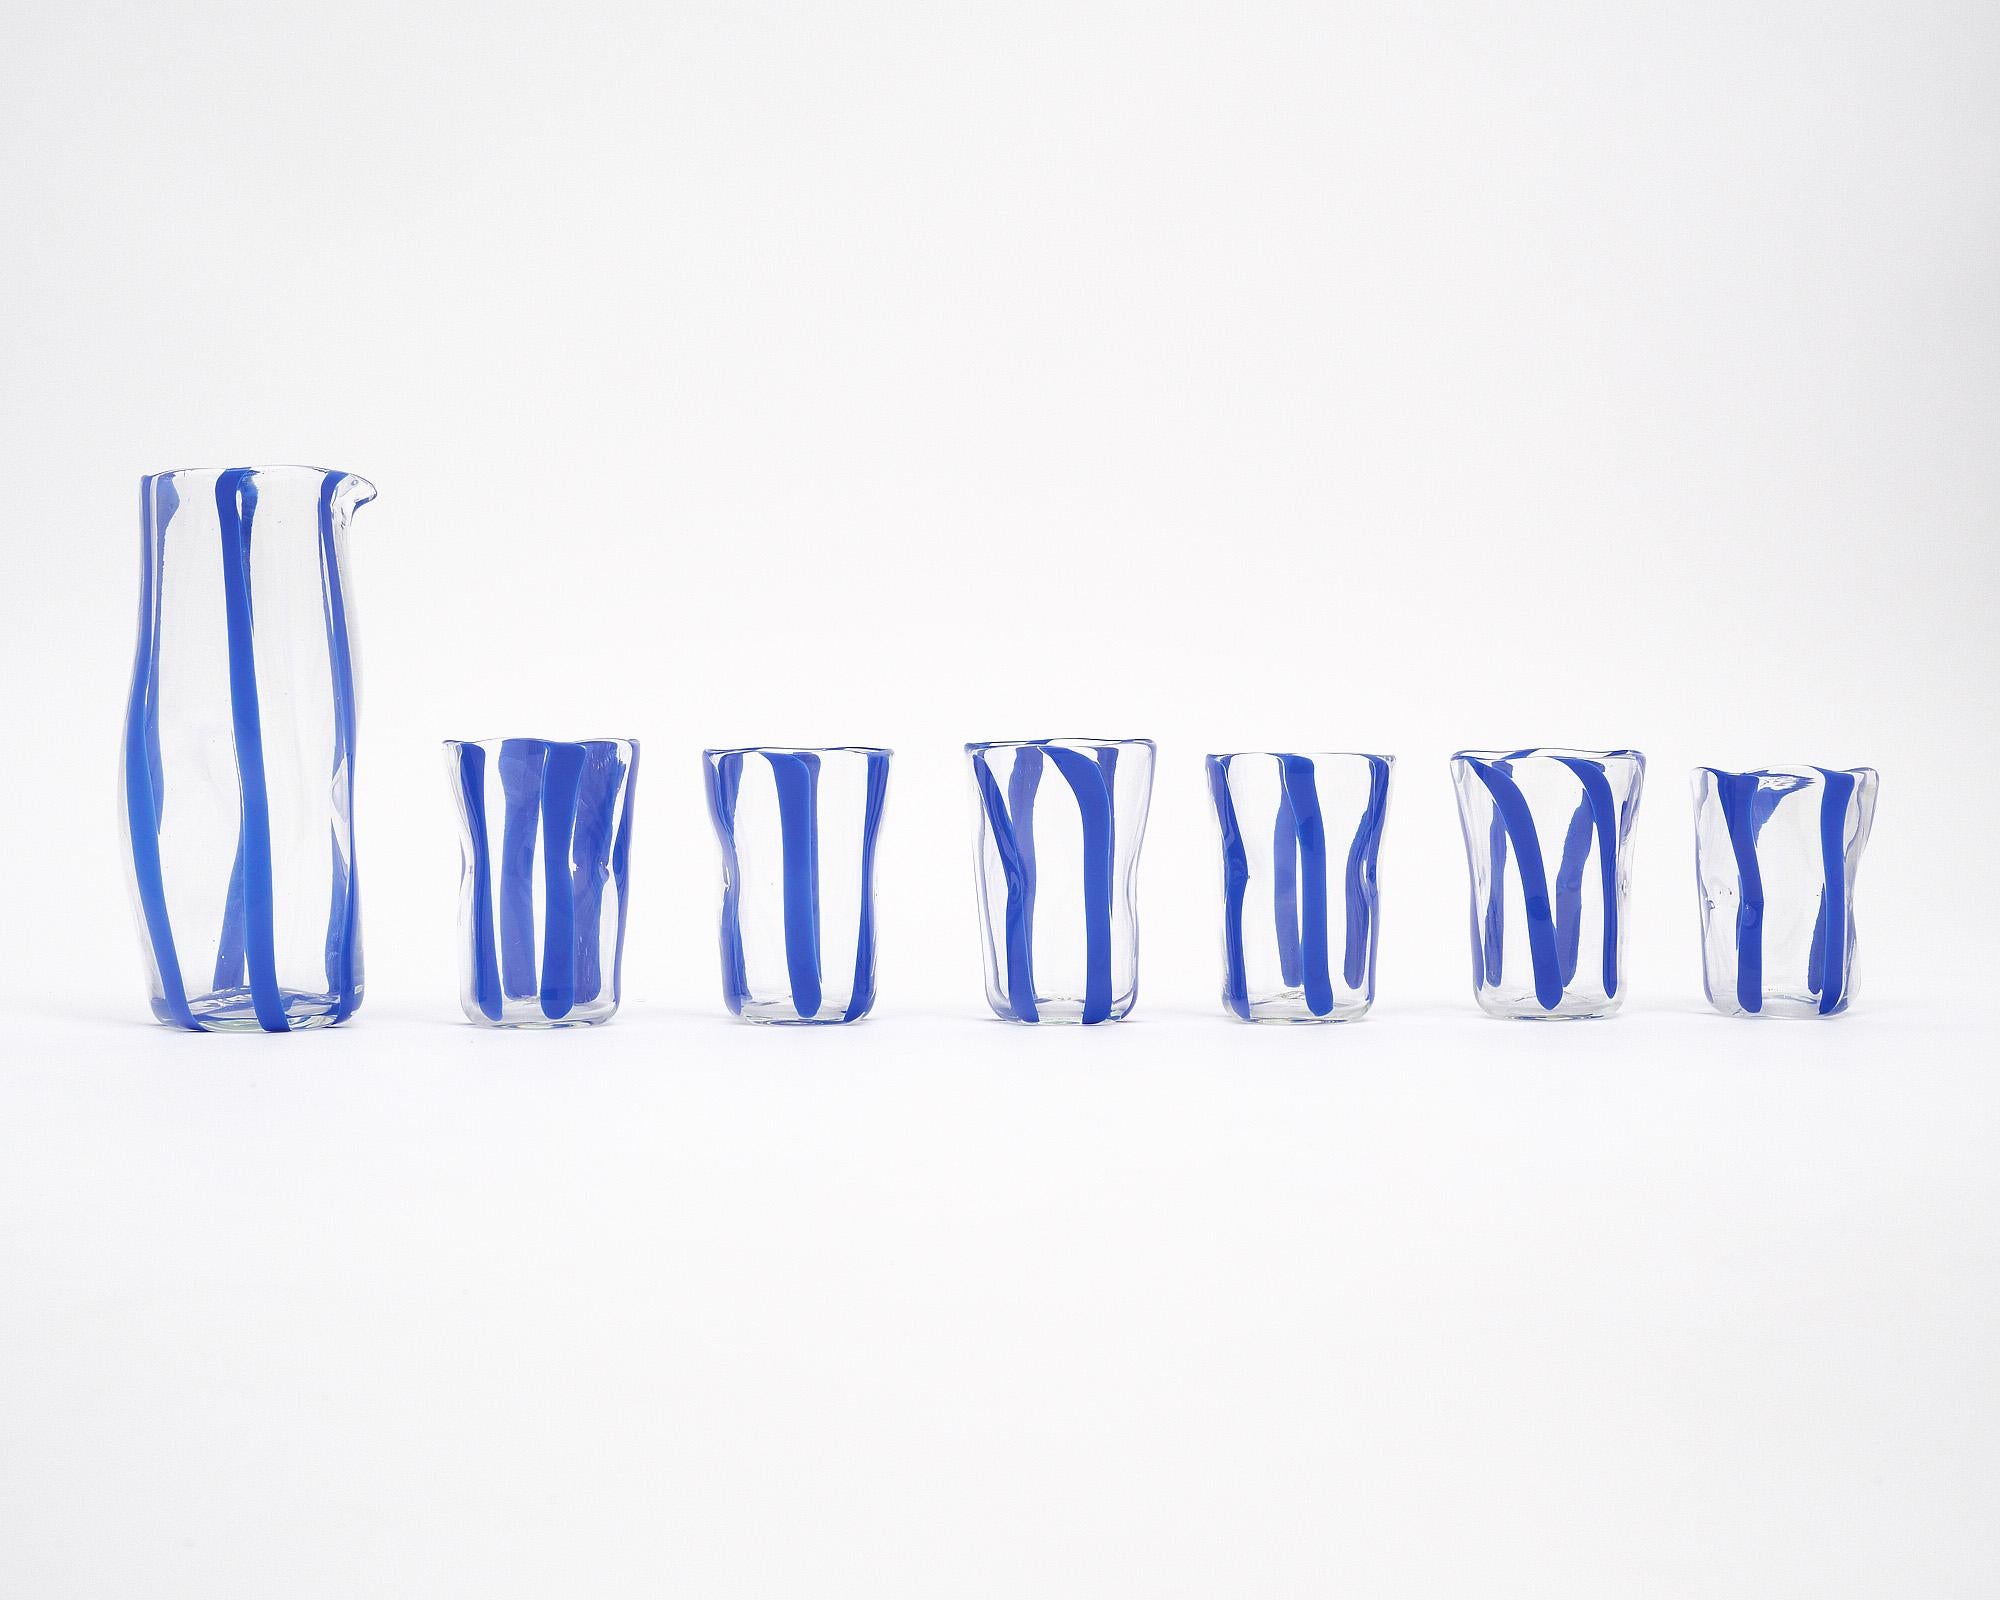 Set of six Murano glass cups and matching carafe. This set is made entirely of hand-blown glass on the island of Murano outside of Venice, Italy. They feature a transparent glass with cobalt blue stripes. We love the organic shapes and feel of this